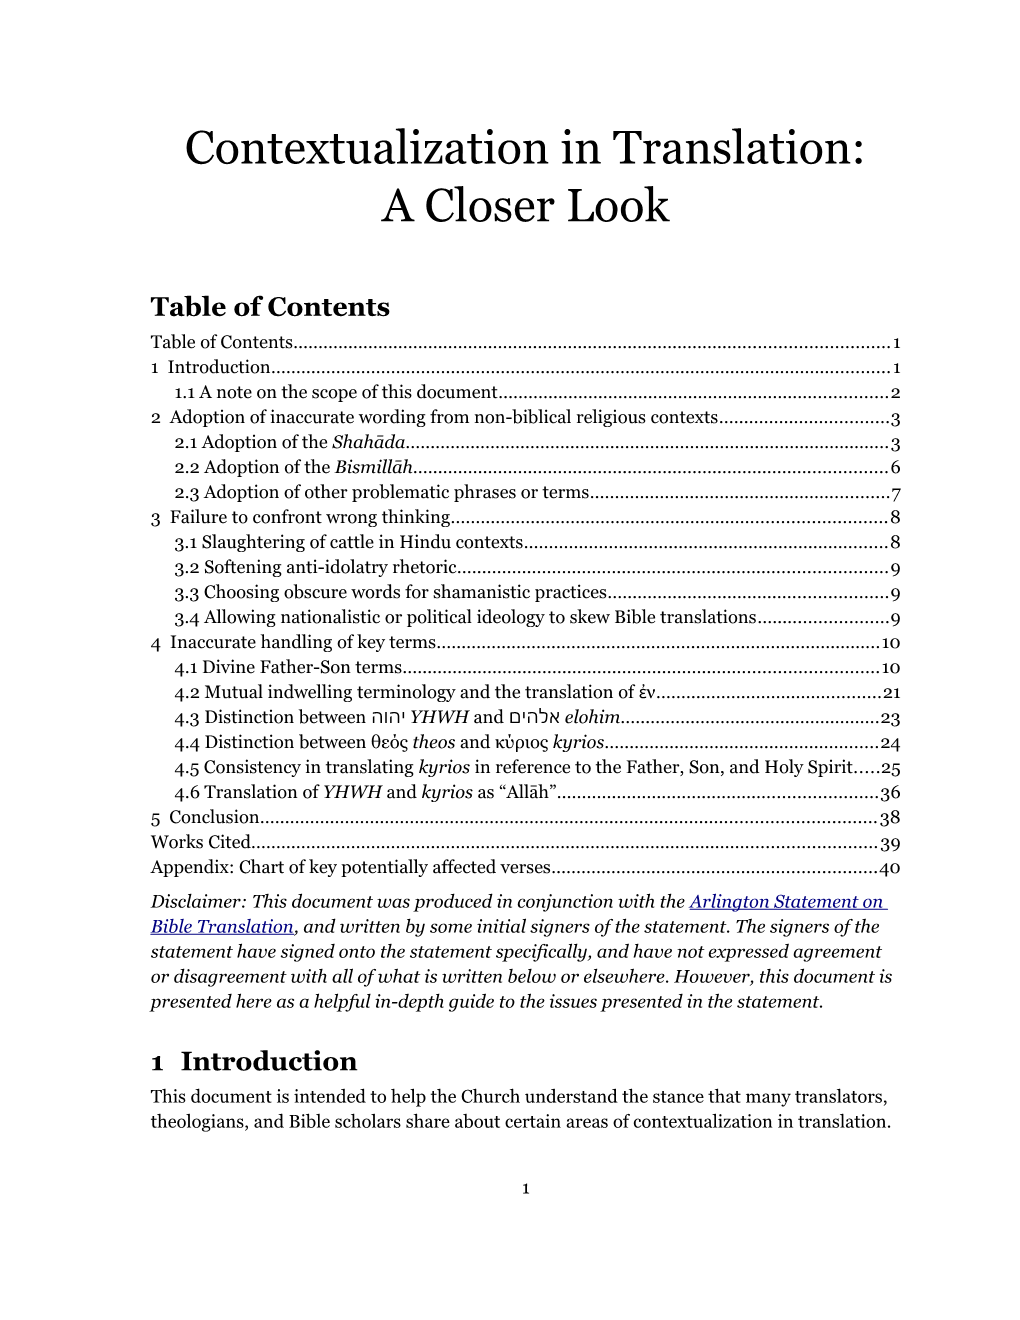 Contextualization in Translation: a Closer Look